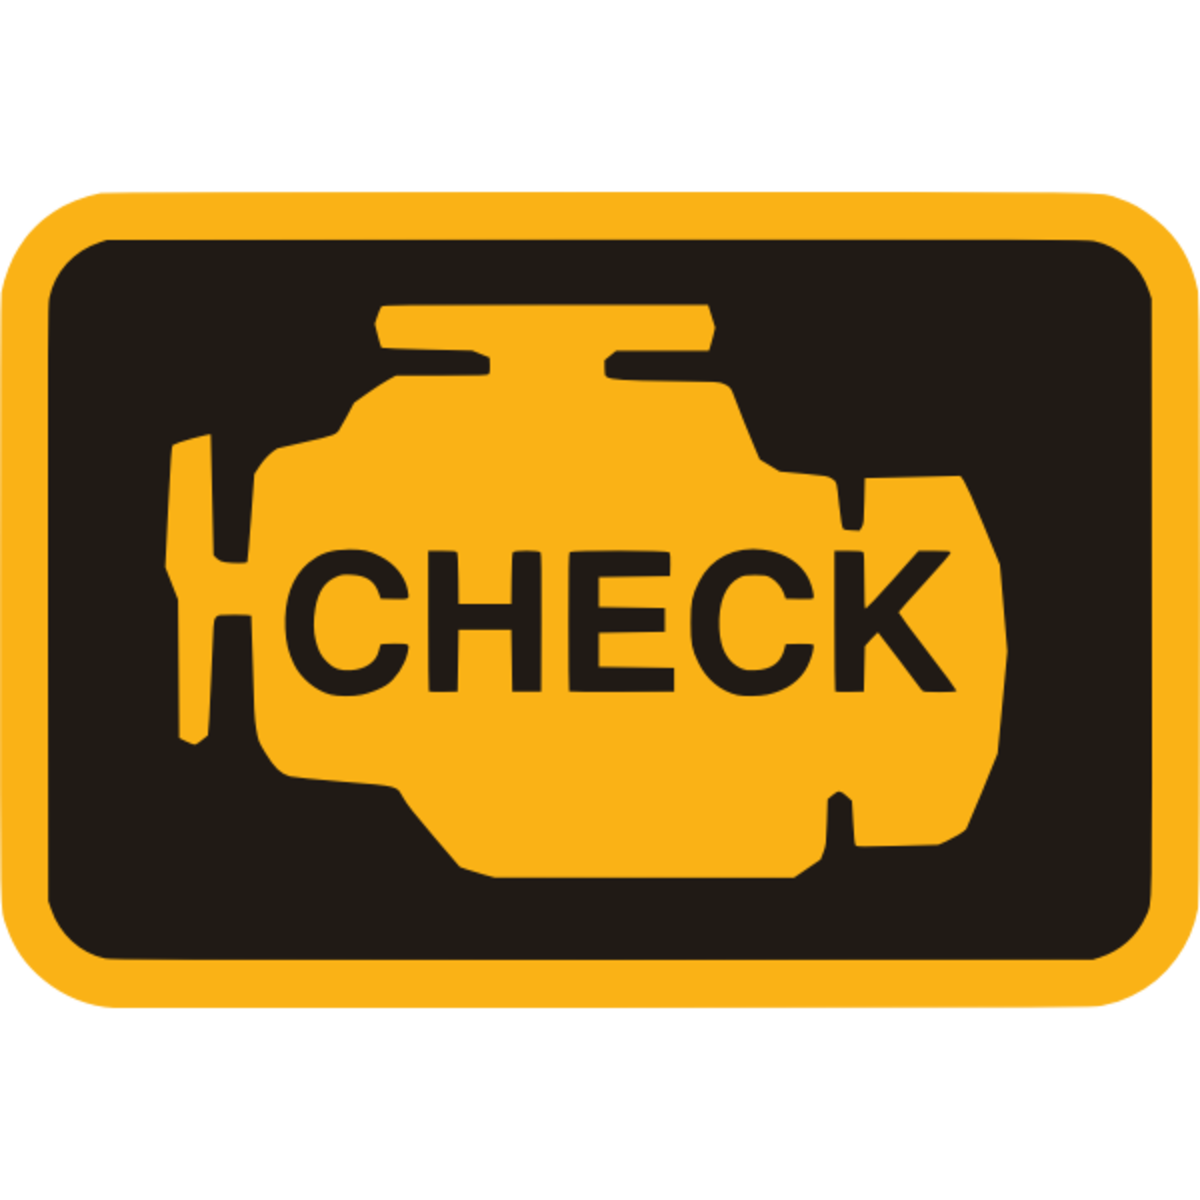 Find out where to connect your auto code scanner if the check engine light comes on.